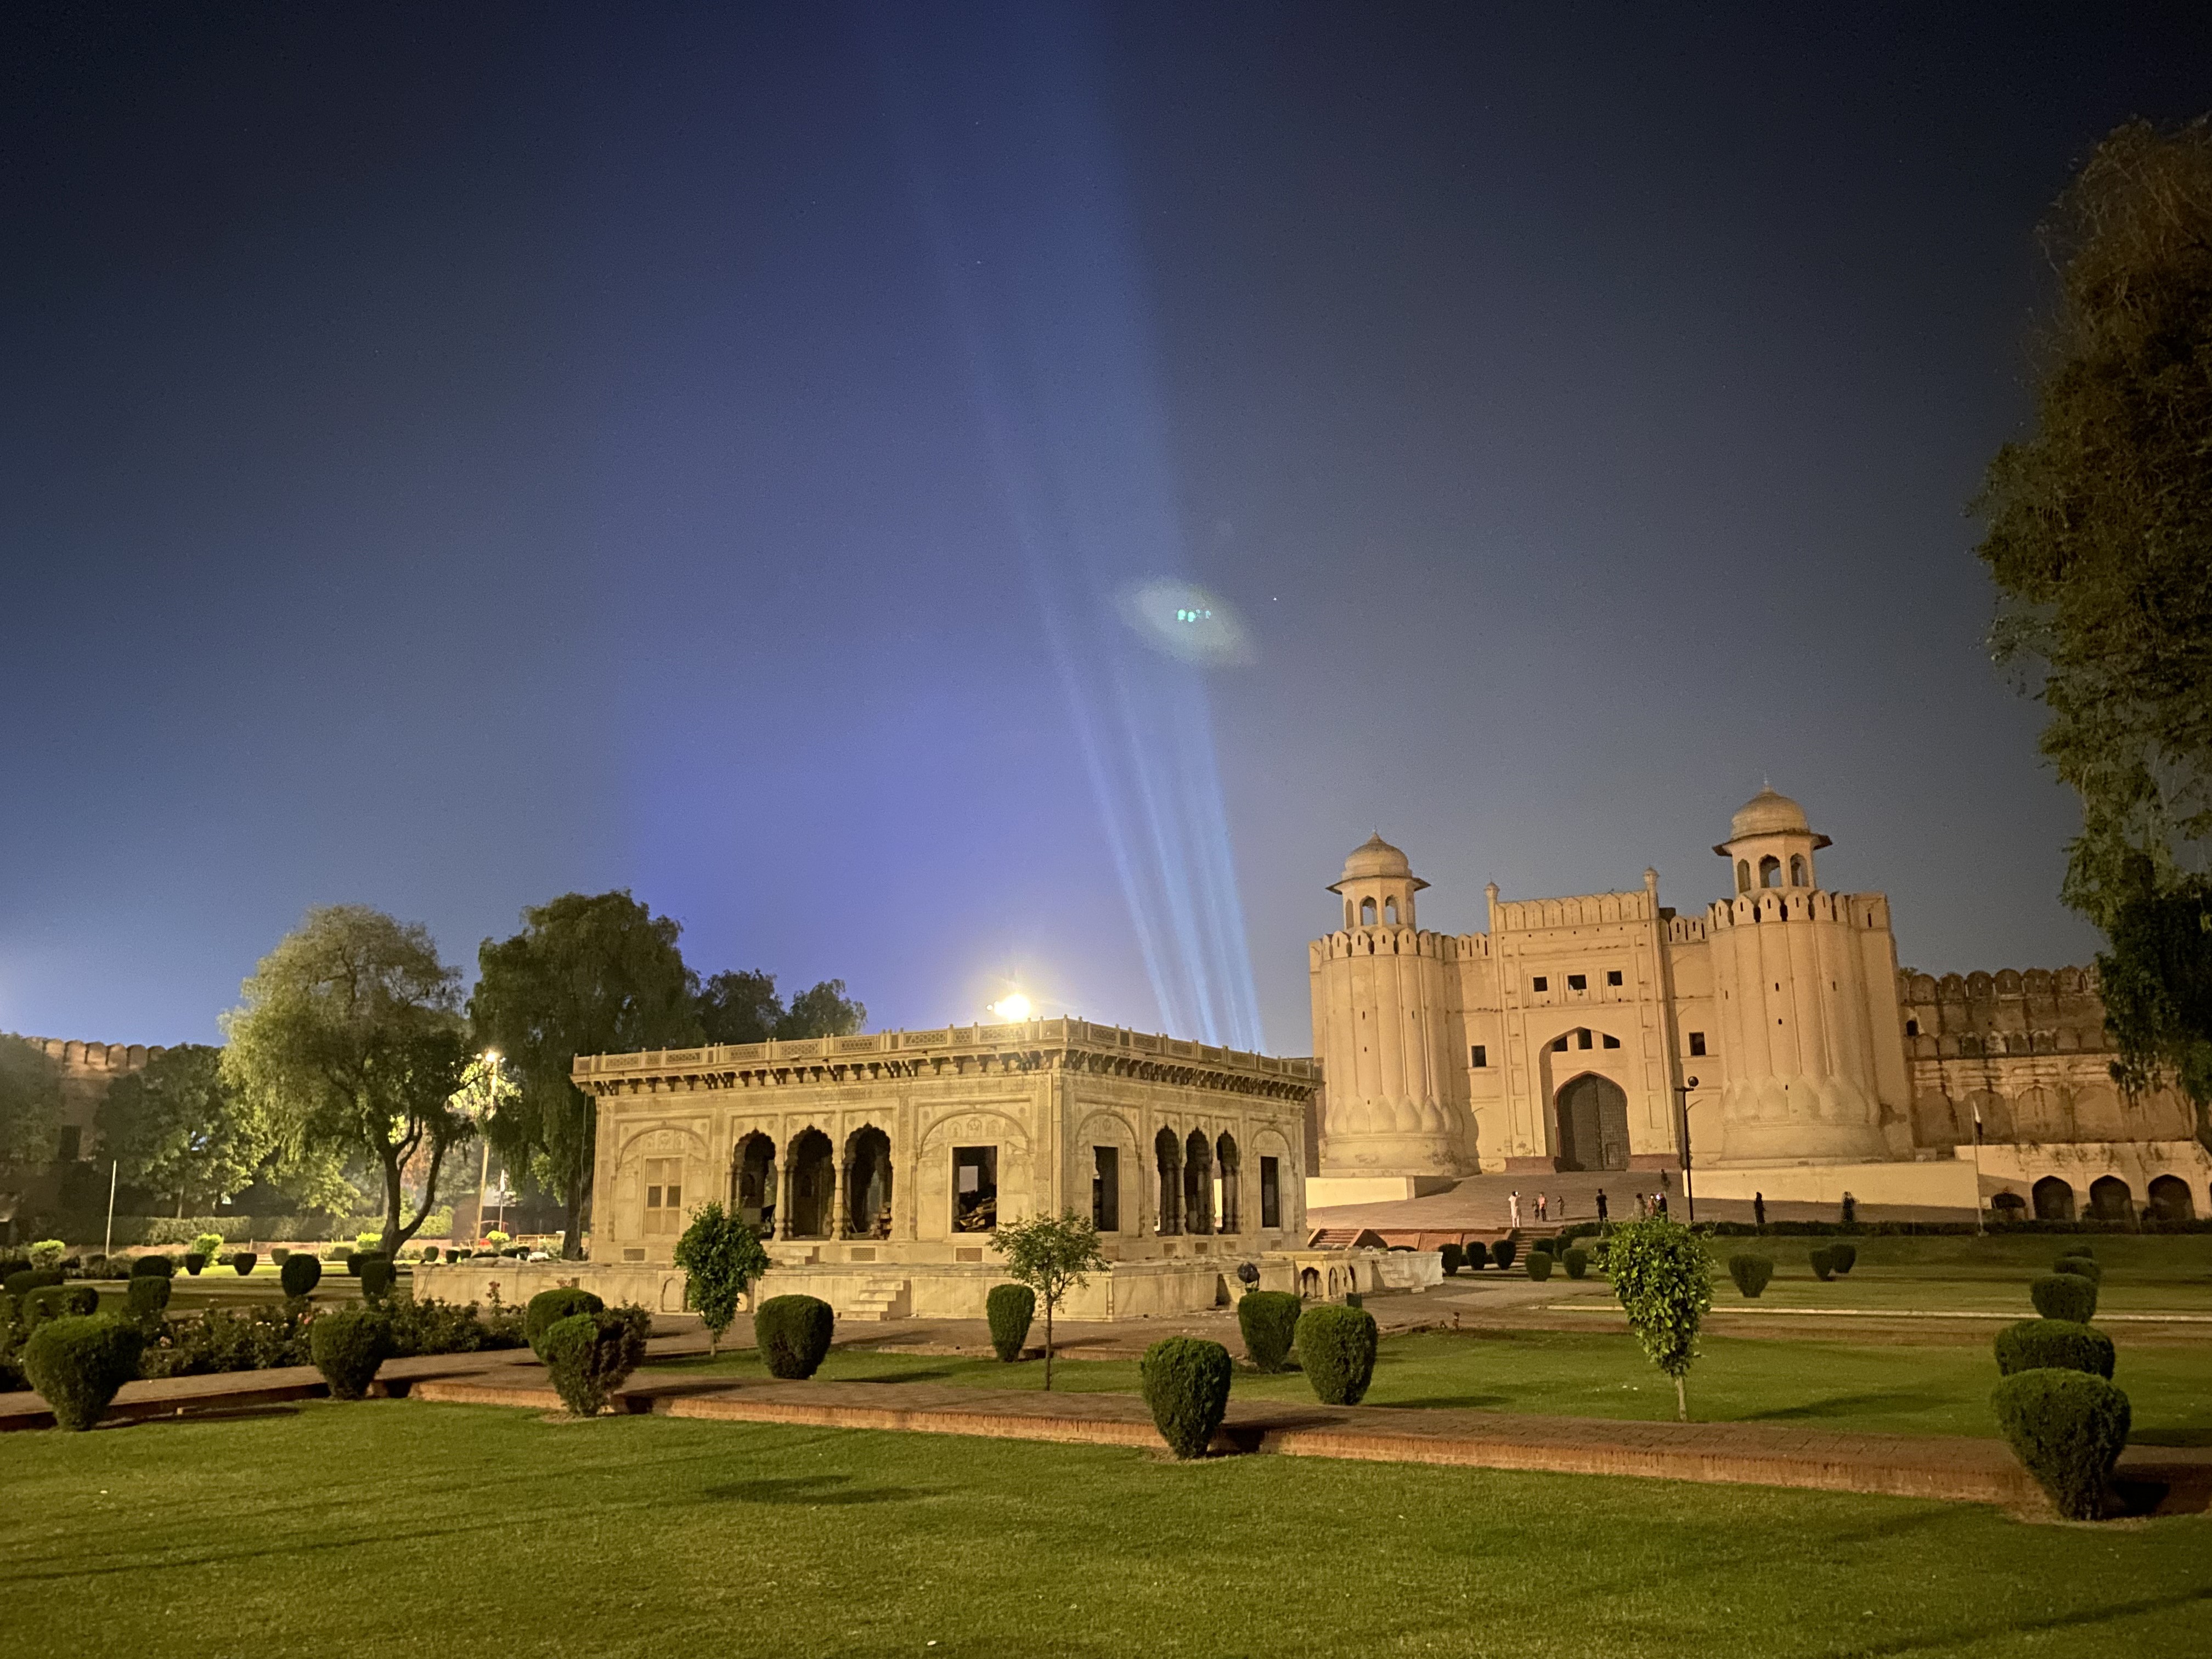 The beautiful view of Lahore Fort